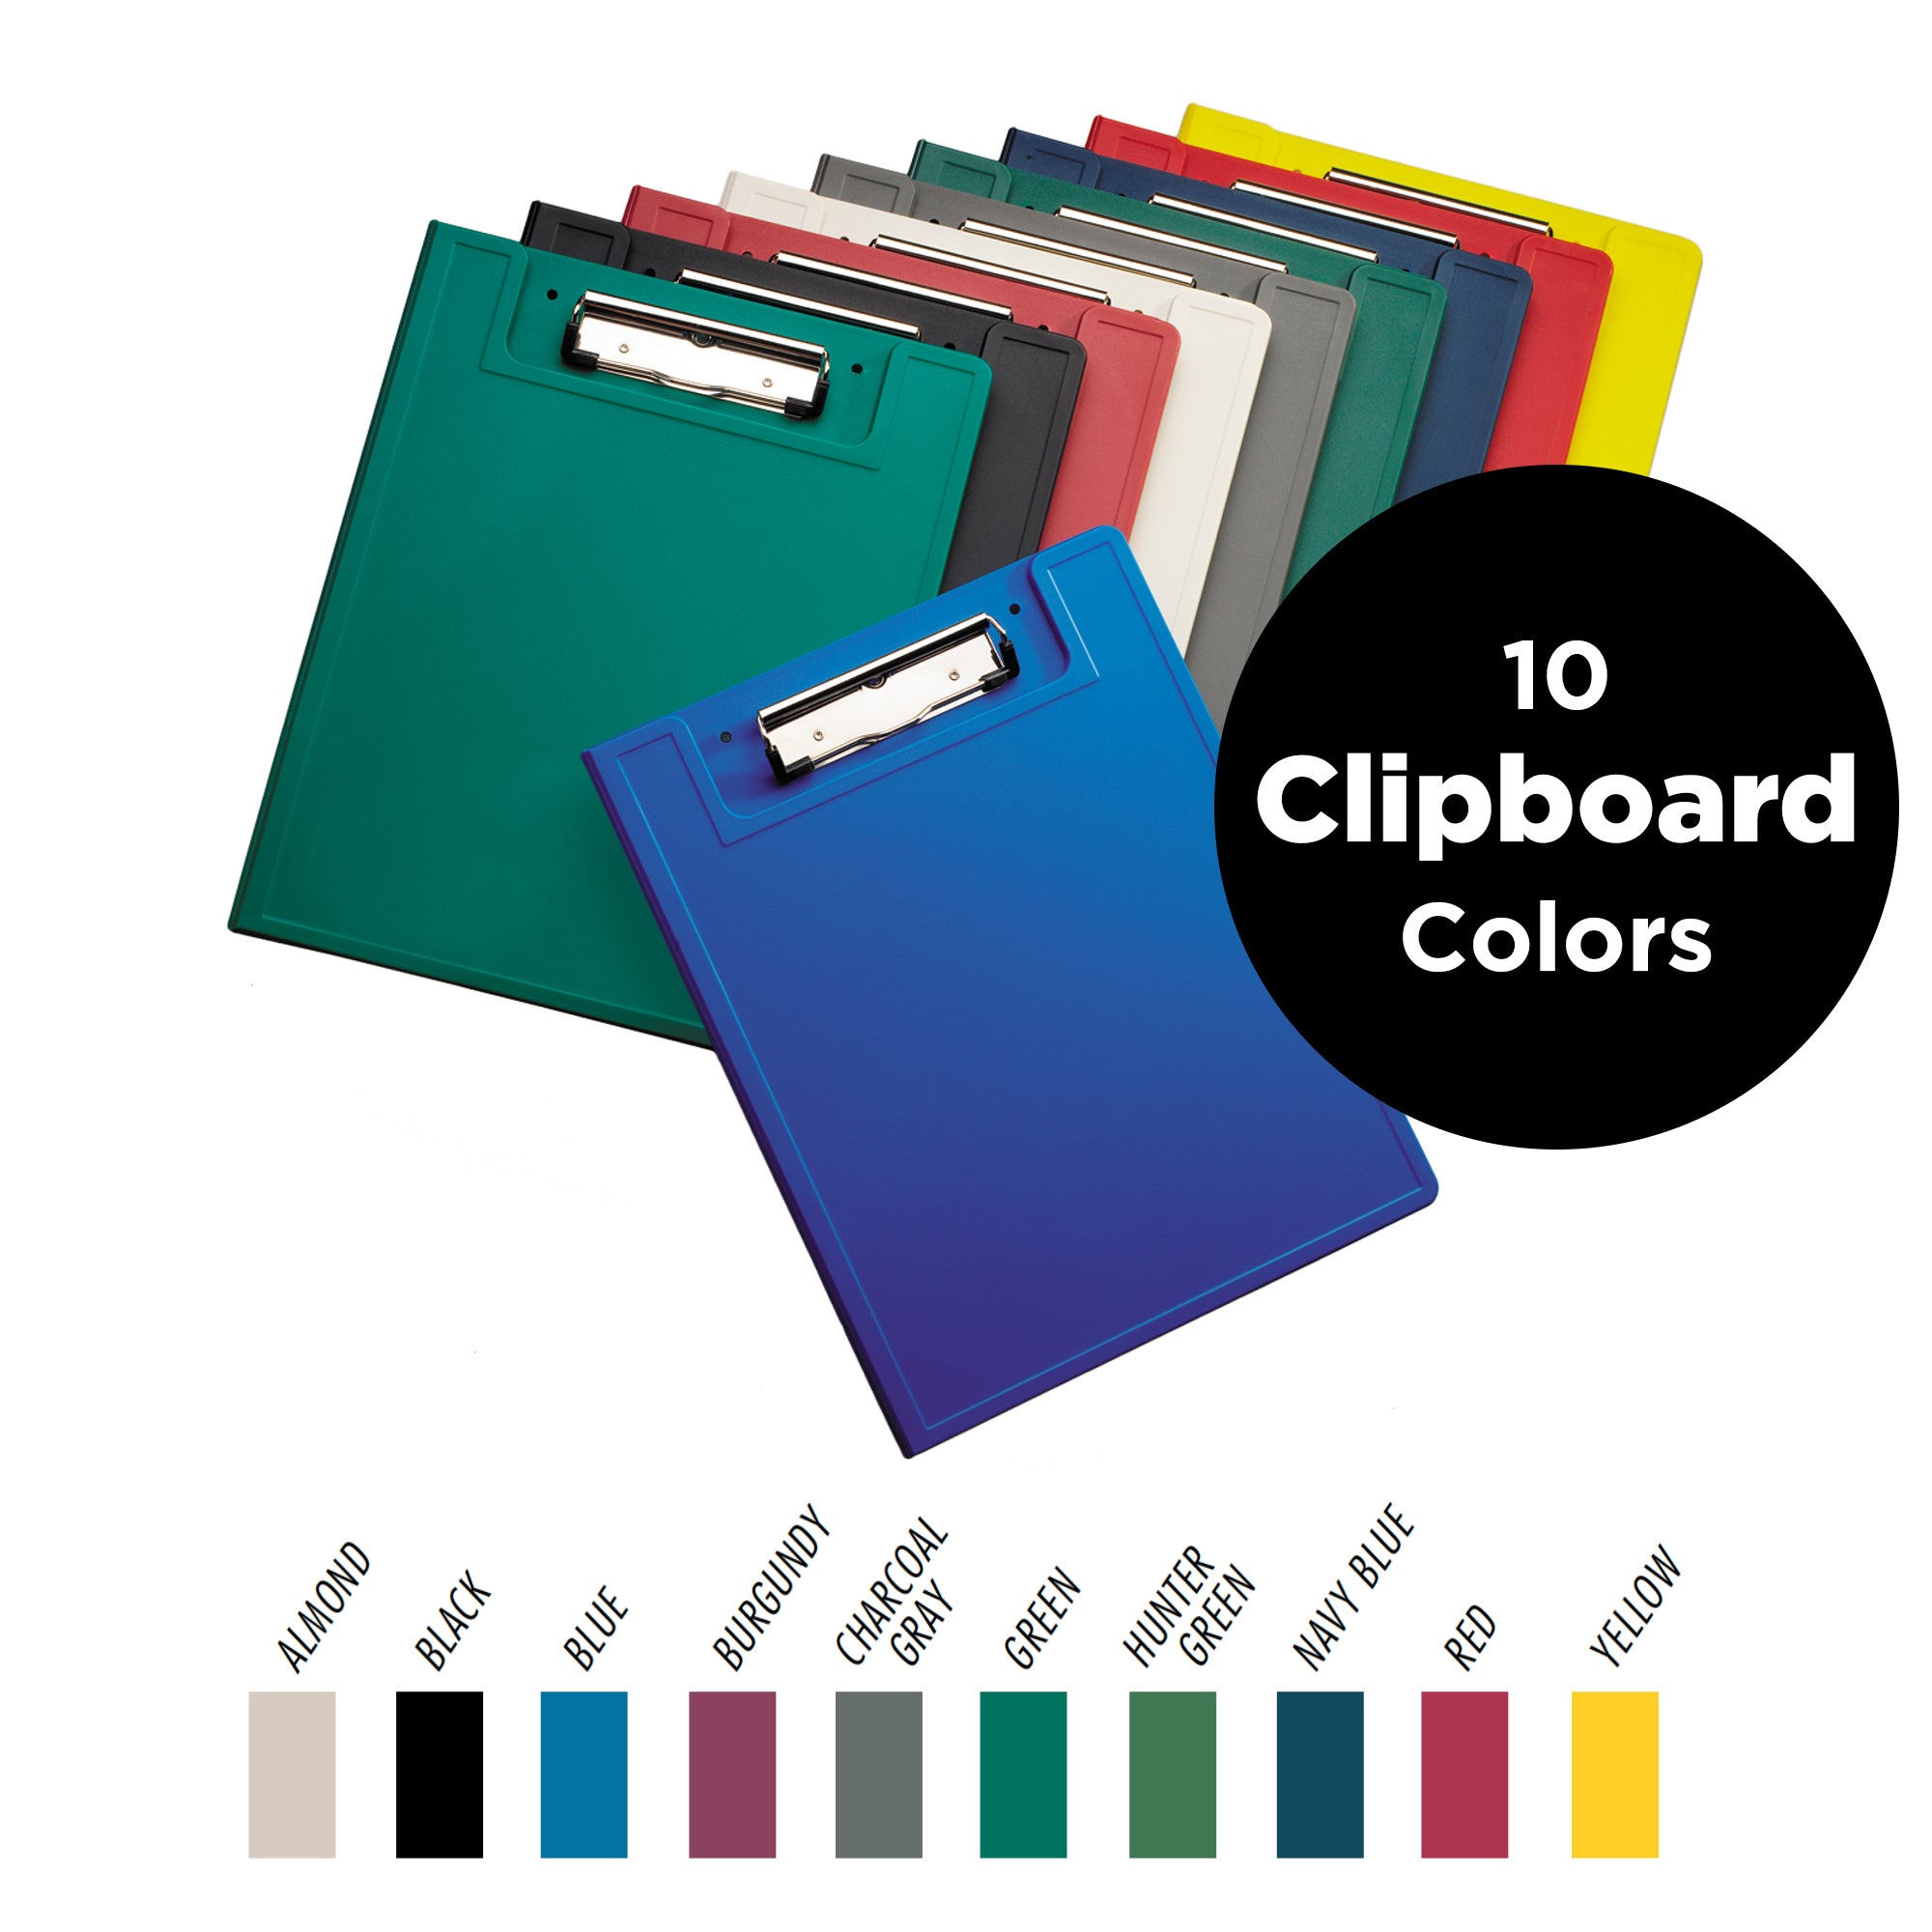 Custom Paper Charting Toolkit with Privacy Clipboards (Set of 25)